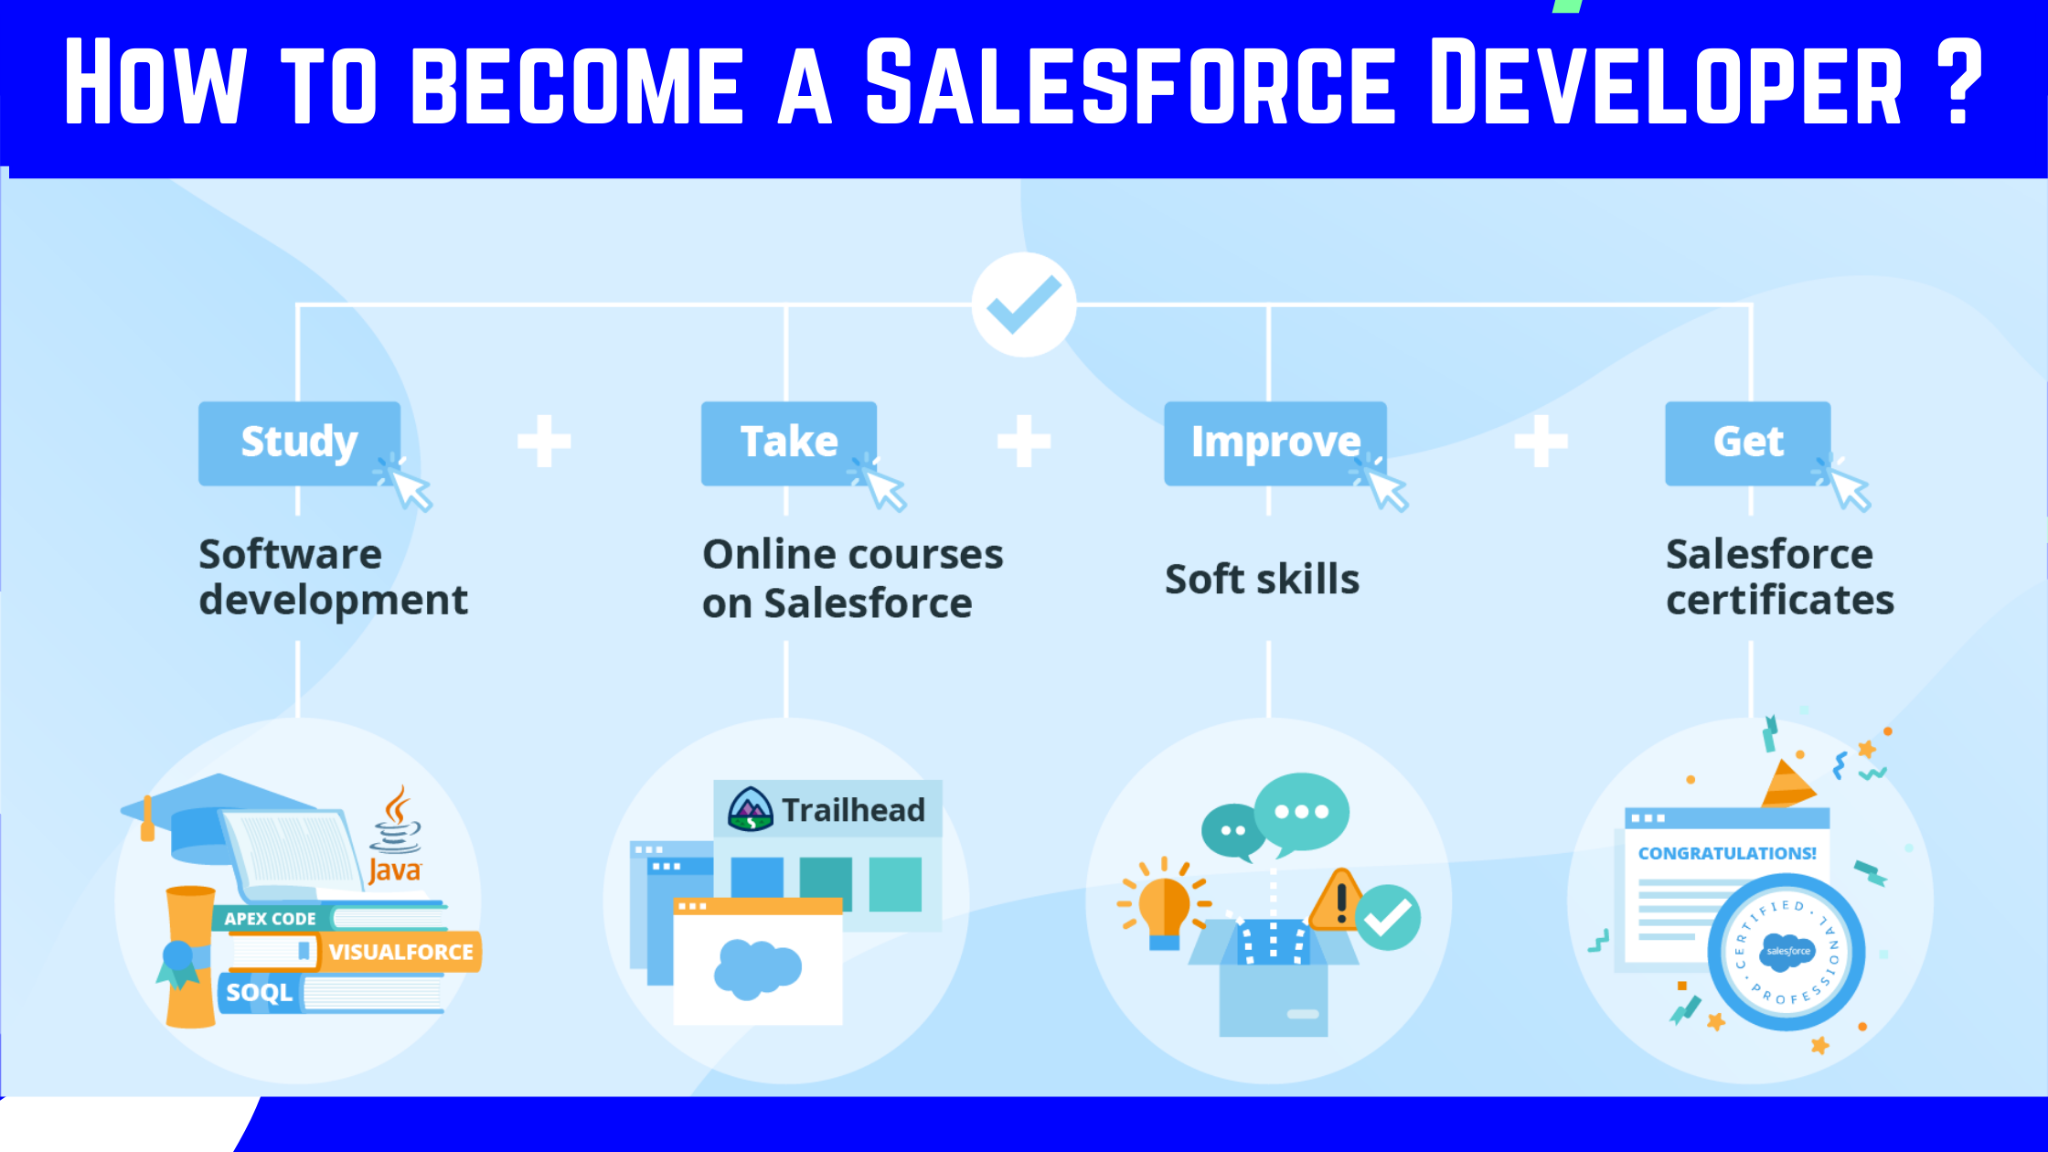 How to Become a Salesforce Developer